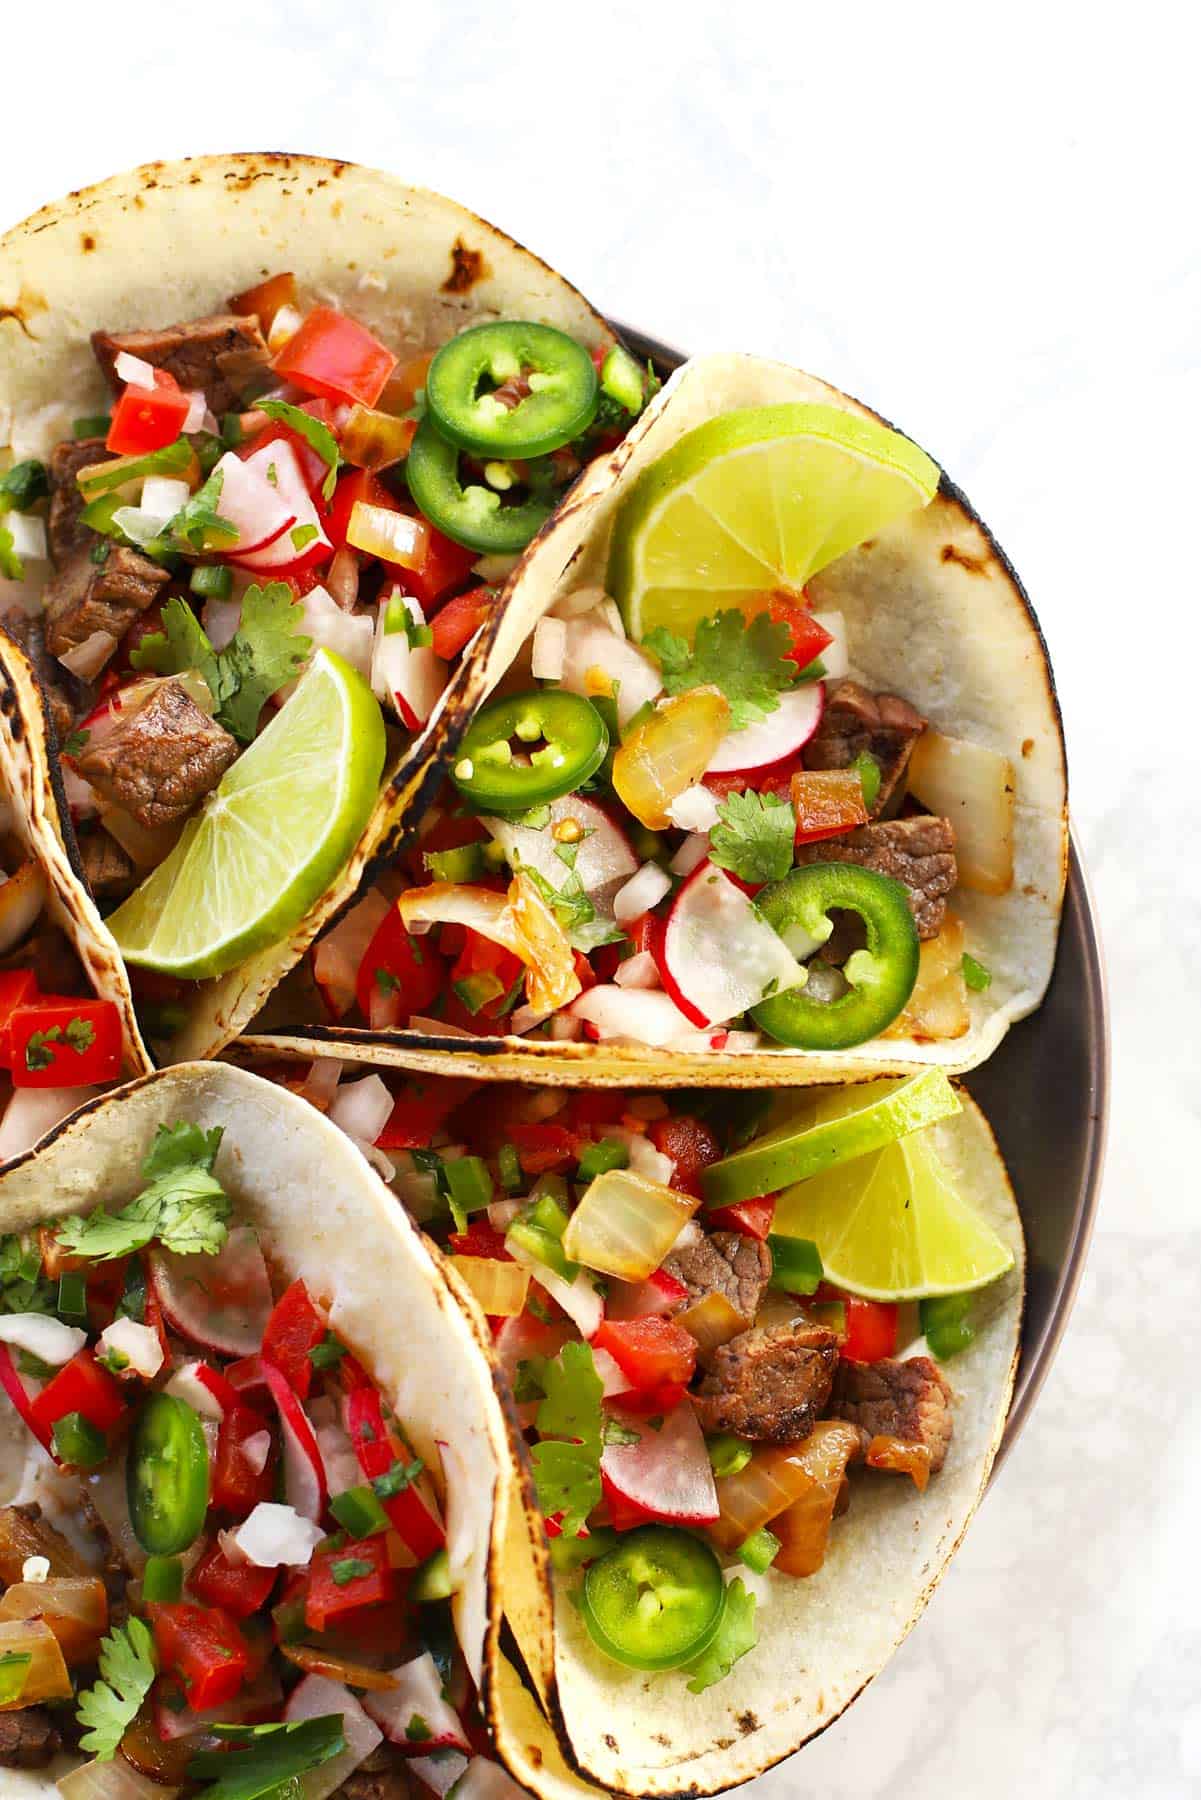 Mexican Street Tacos - Zested Lemon